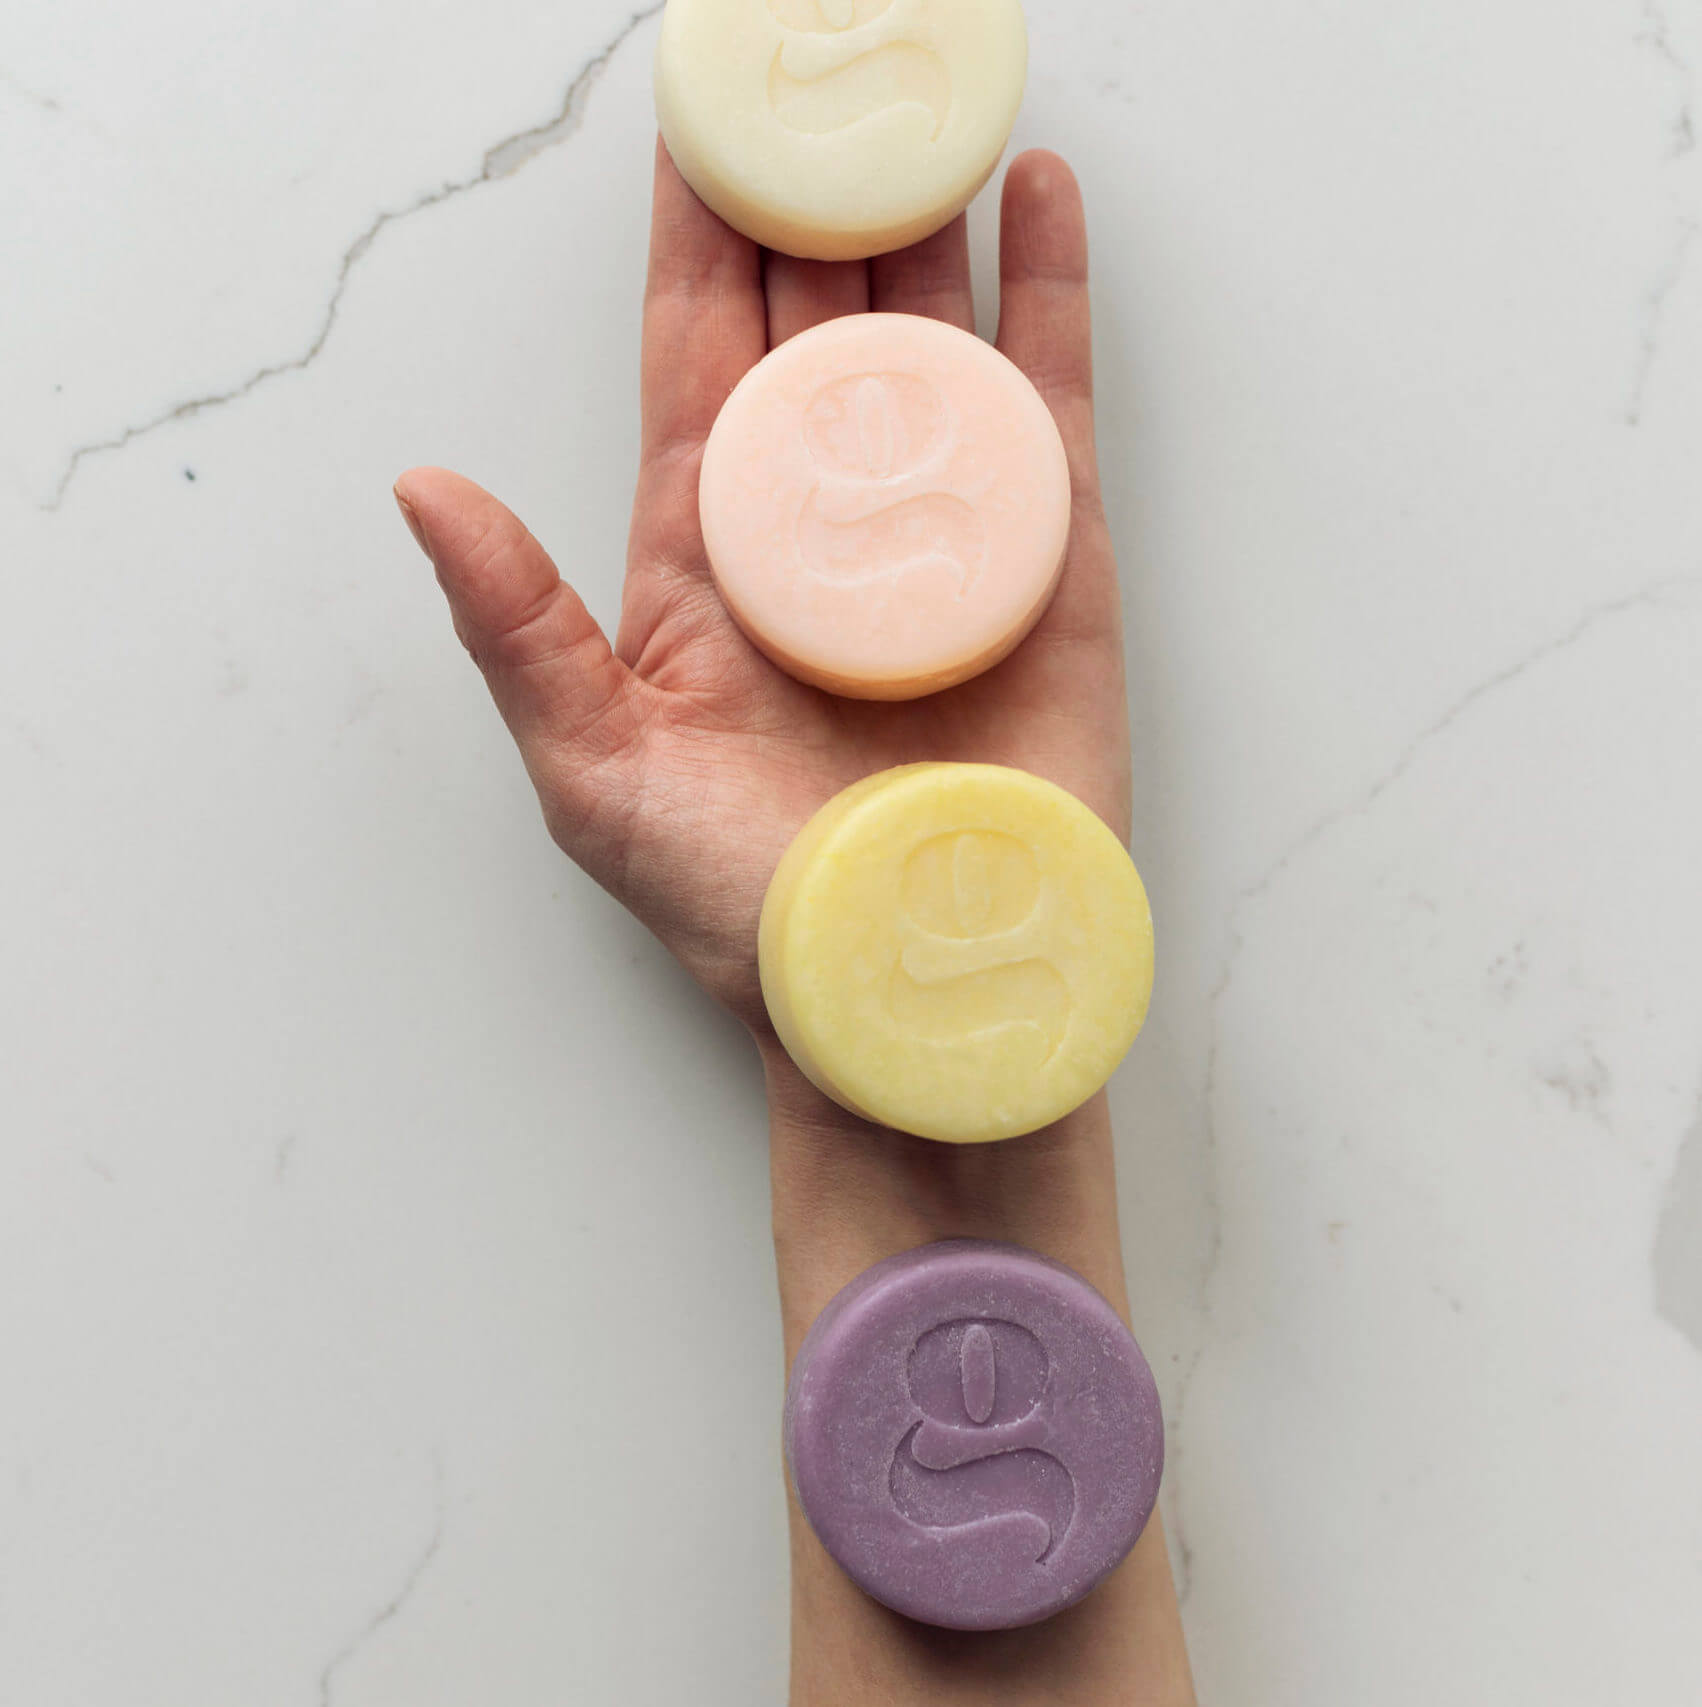 SOAP FOR GLOBE Colored hair conditioner bar